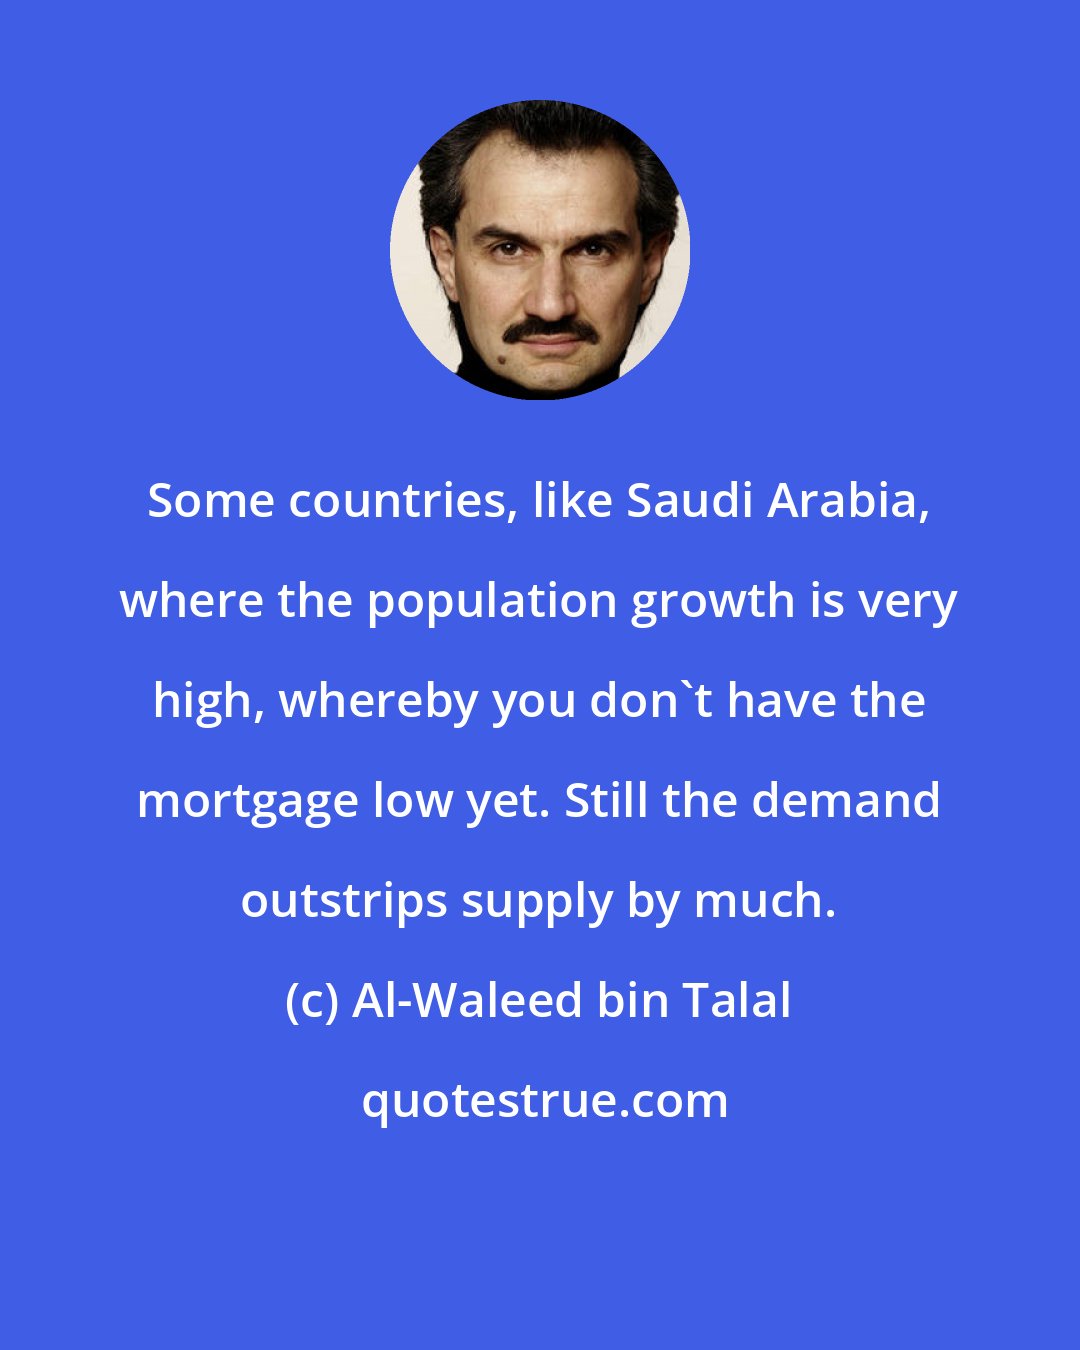 Al-Waleed bin Talal: Some countries, like Saudi Arabia, where the population growth is very high, whereby you don't have the mortgage low yet. Still the demand outstrips supply by much.